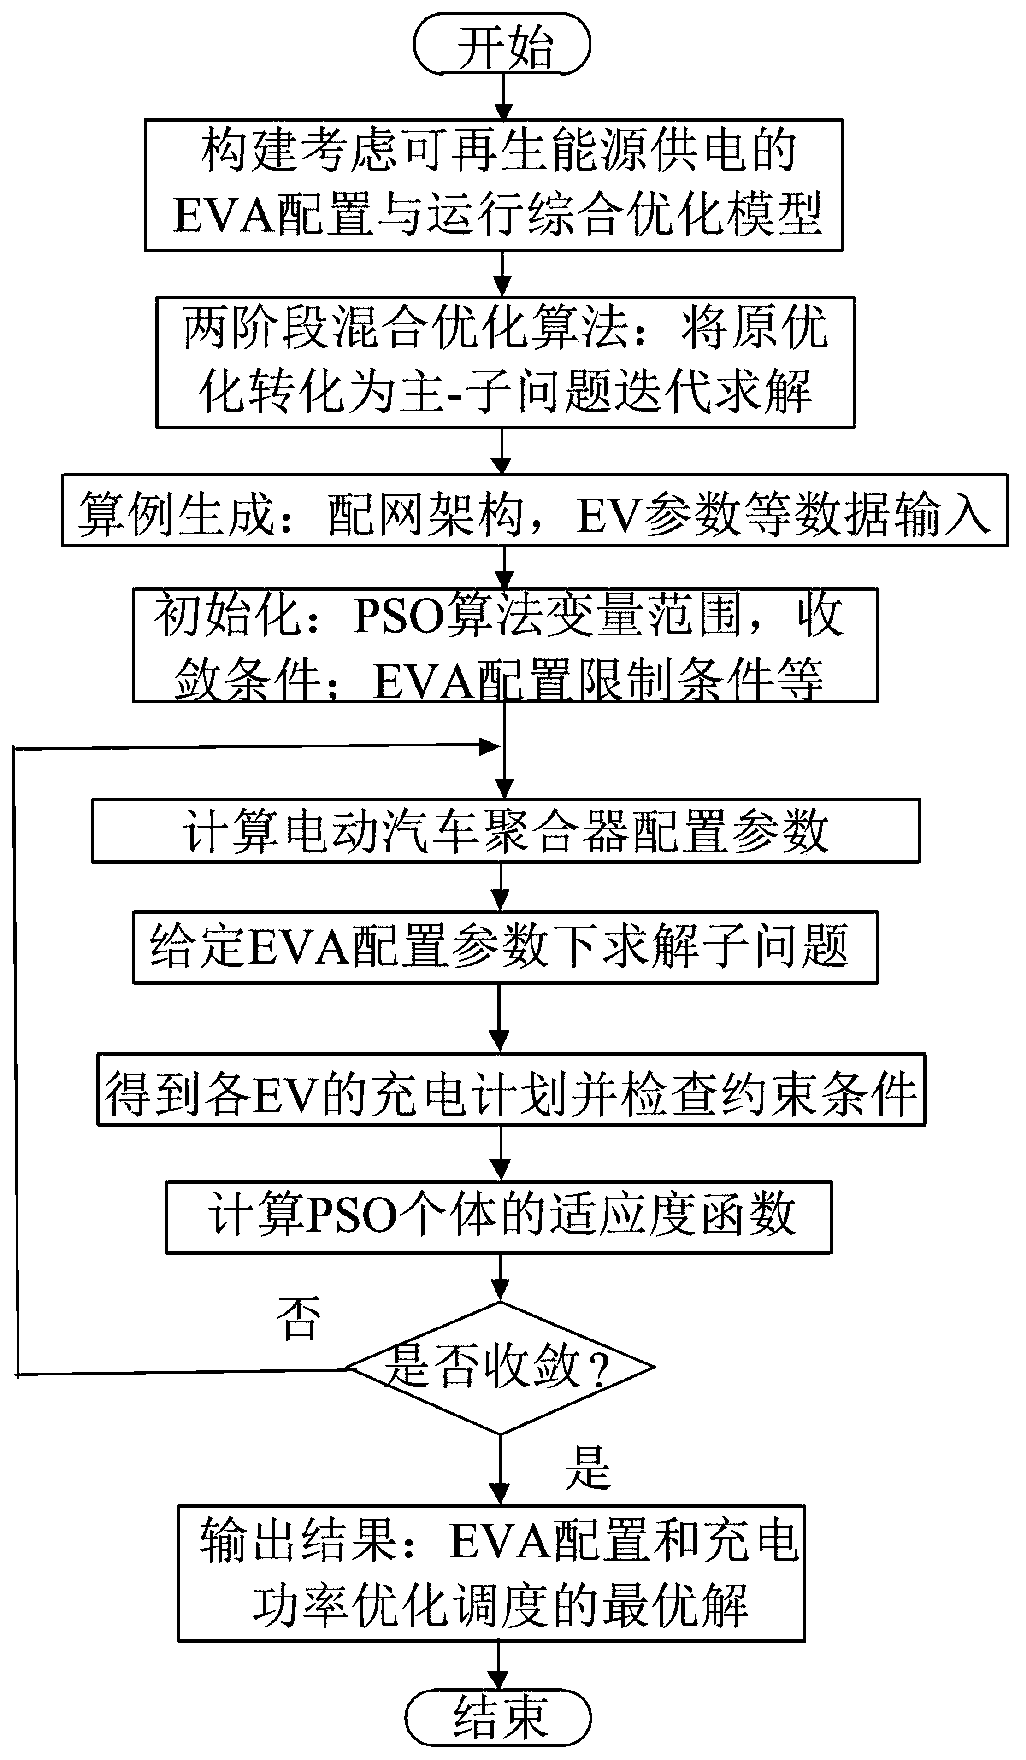 Electric vehicle cluster charging power optimization method capable of promoting renewable energy consumption